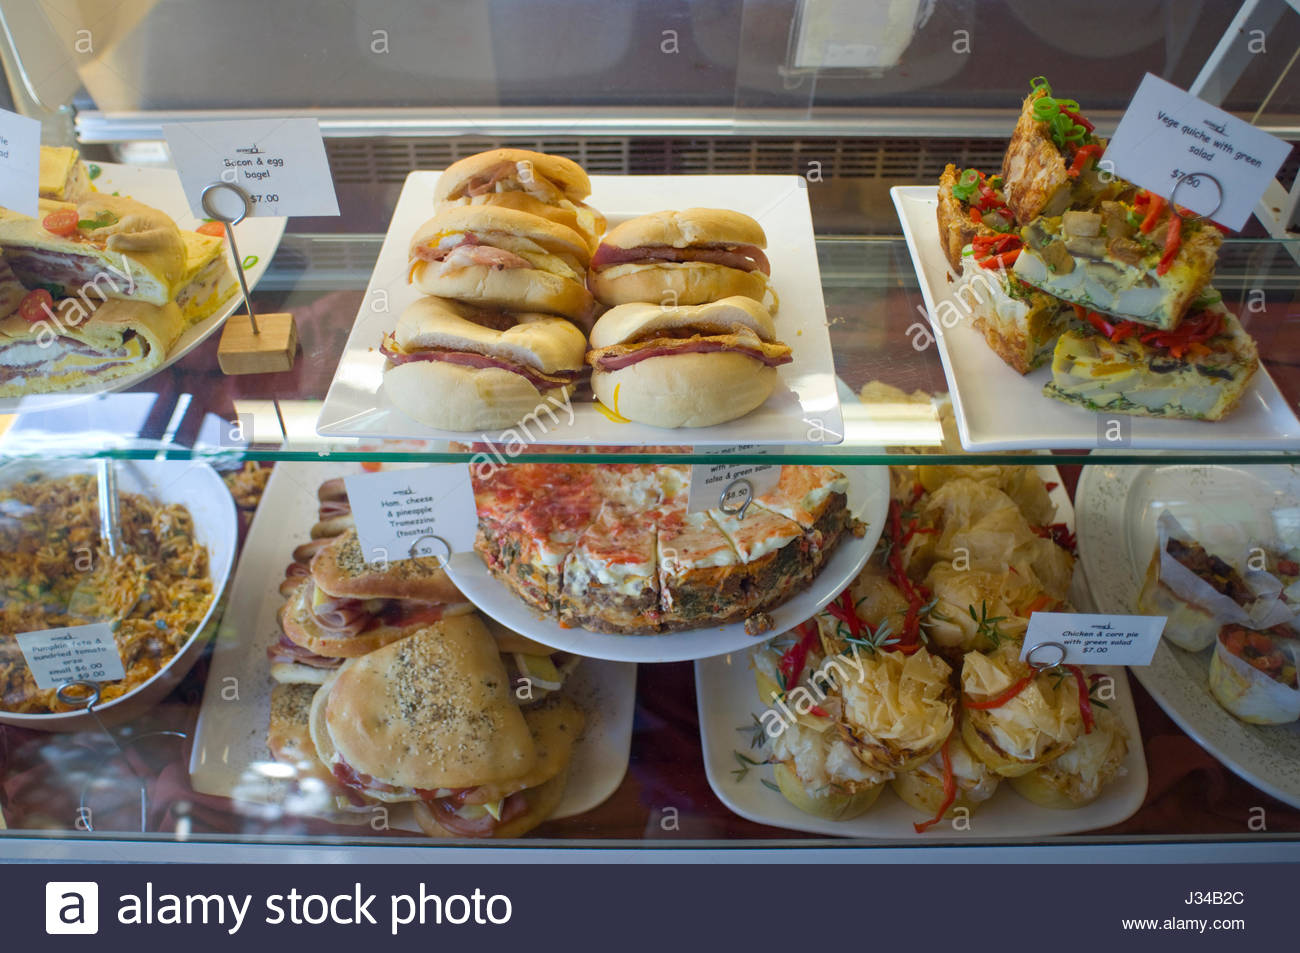 Fresh Food Including Sandwiches Quiches Pies And Deserts In